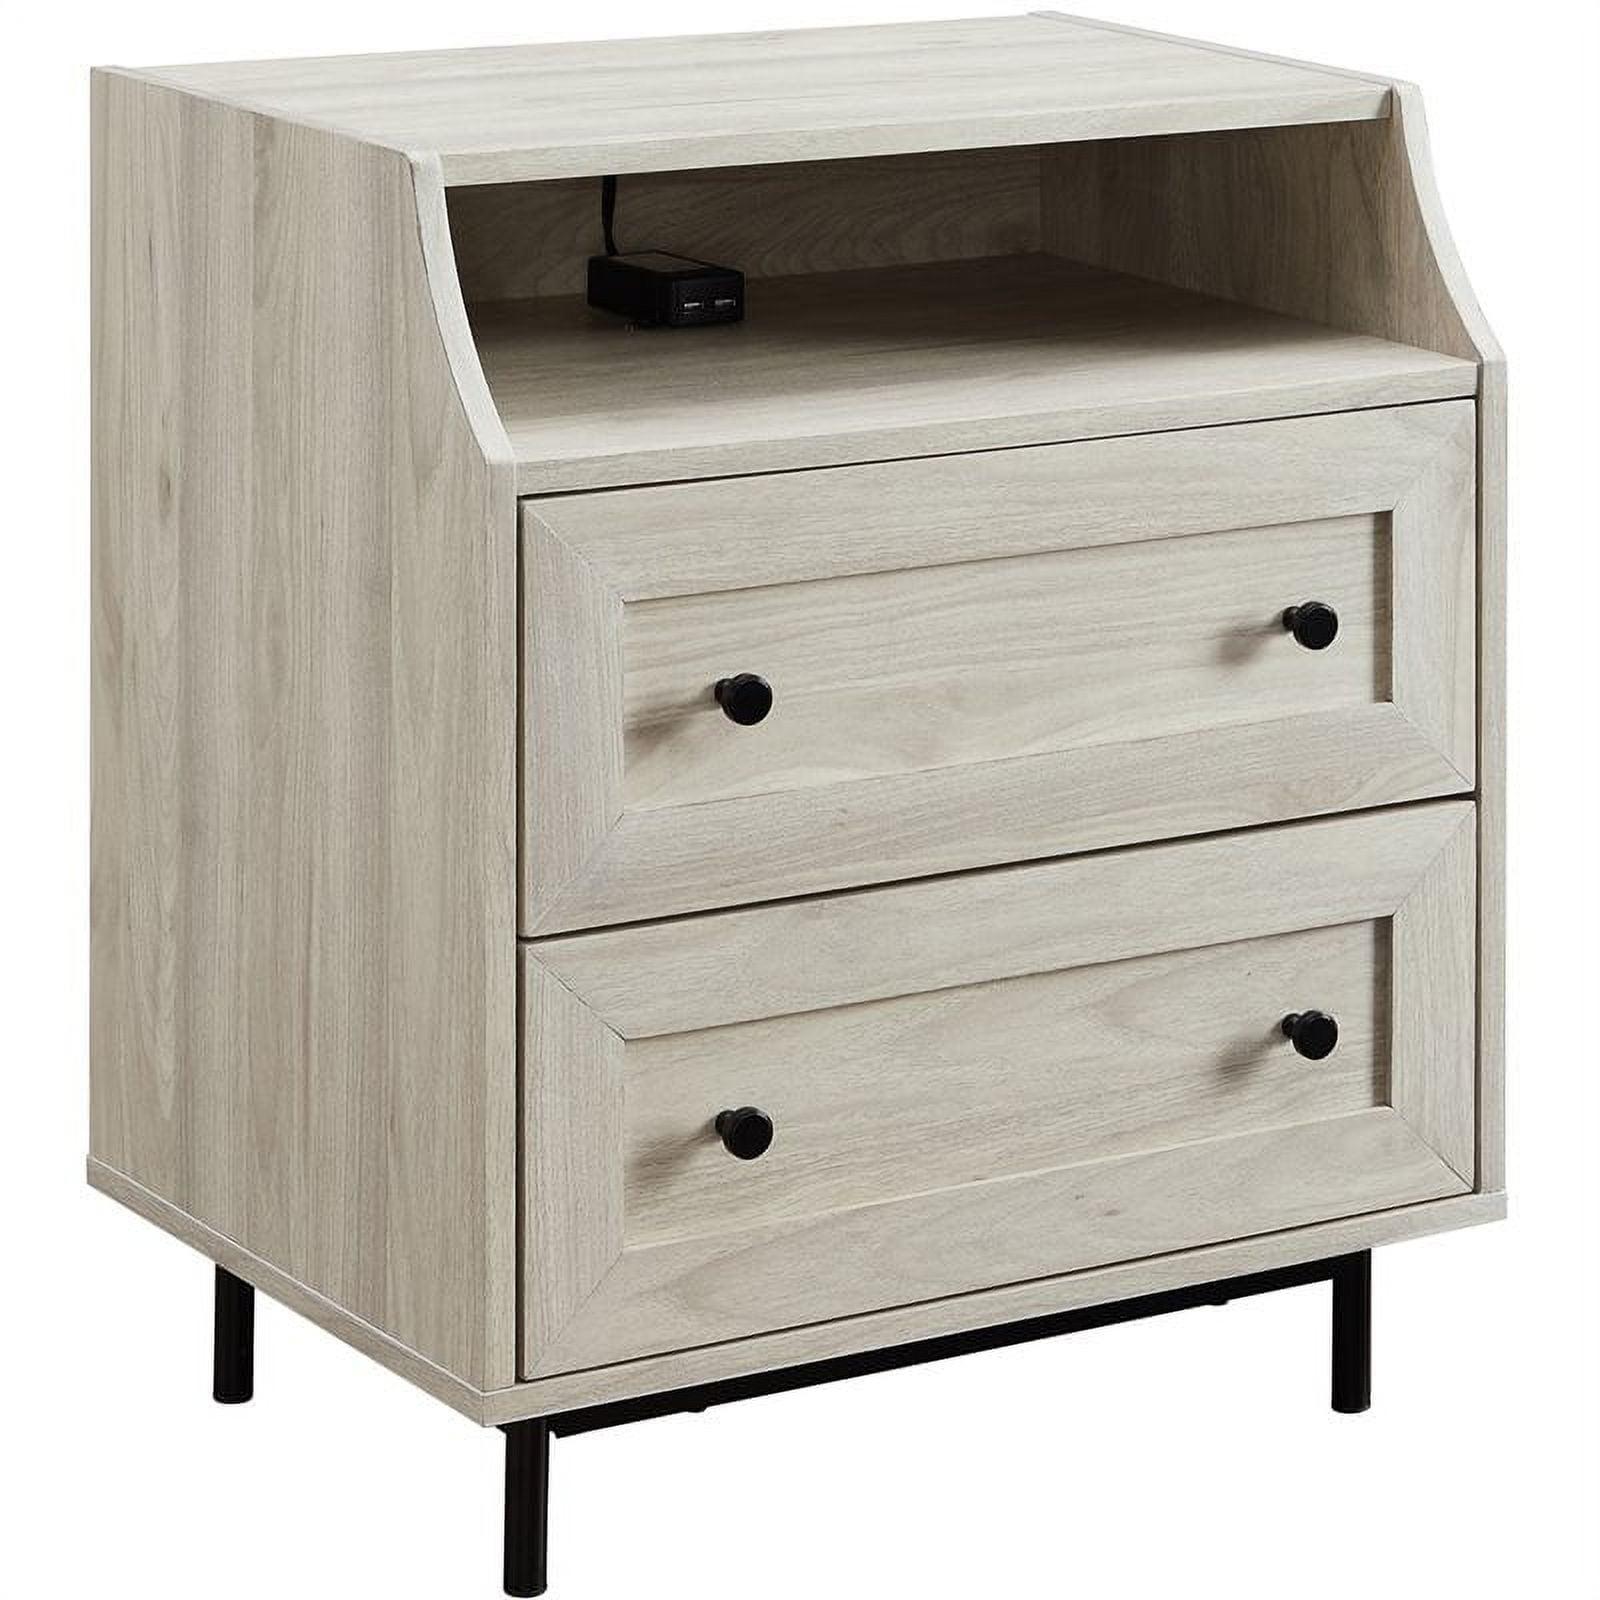 Birch Contemporary 22" Nightstand with Dual USB and Cord Management